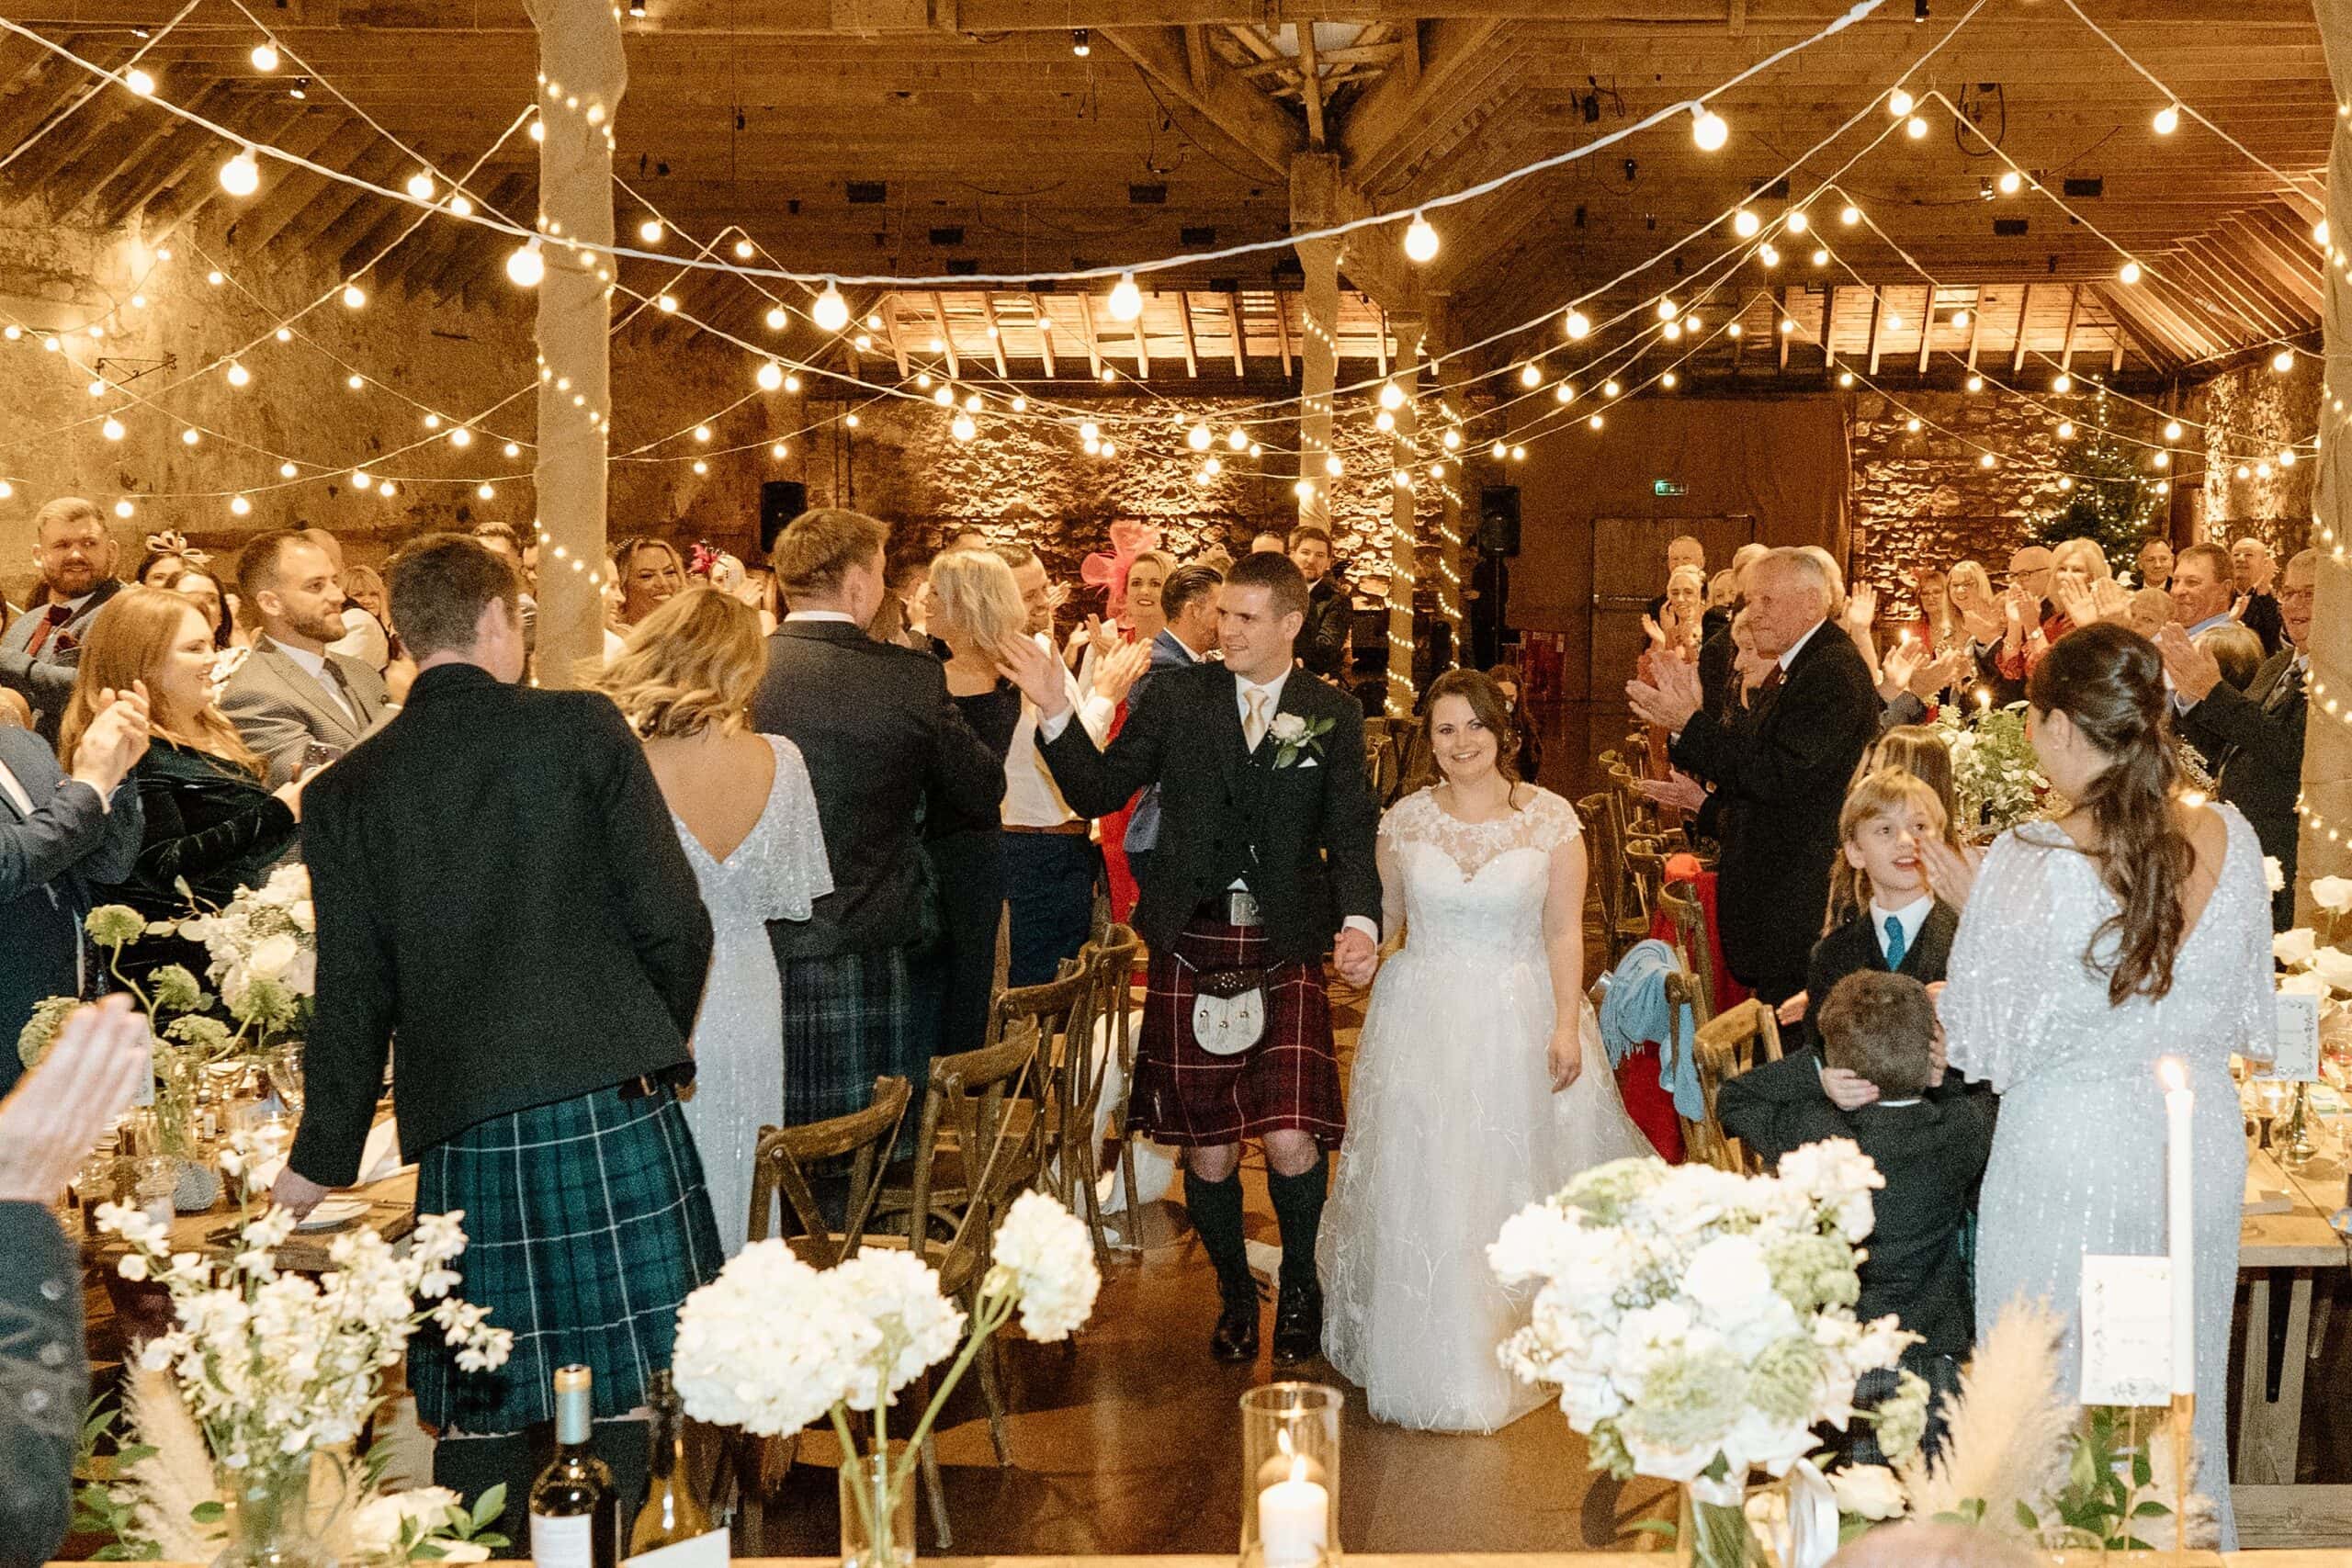 kinkell byre wedding photos interior inside view of farm barn wedding venue st andrews scotland reception dinner setup with fairy lights and long trestle tables and bride and groom entrance to dinner reception